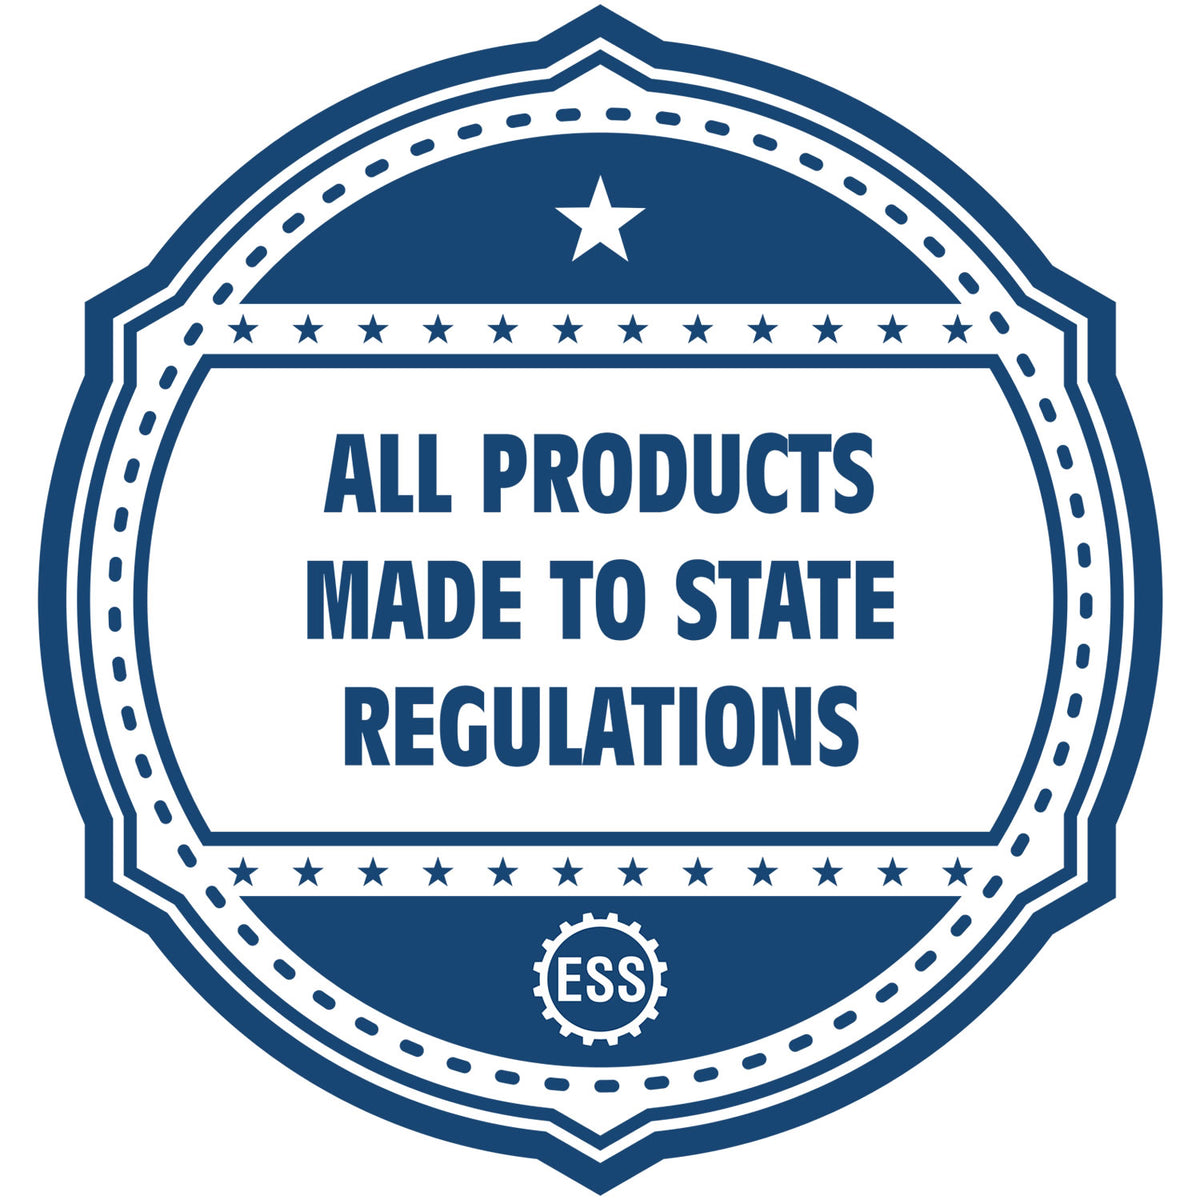 An icon or badge element for the Digital Alabama PE Stamp and Electronic Seal for Alabama Engineer showing that this product is made in compliance with state regulations.